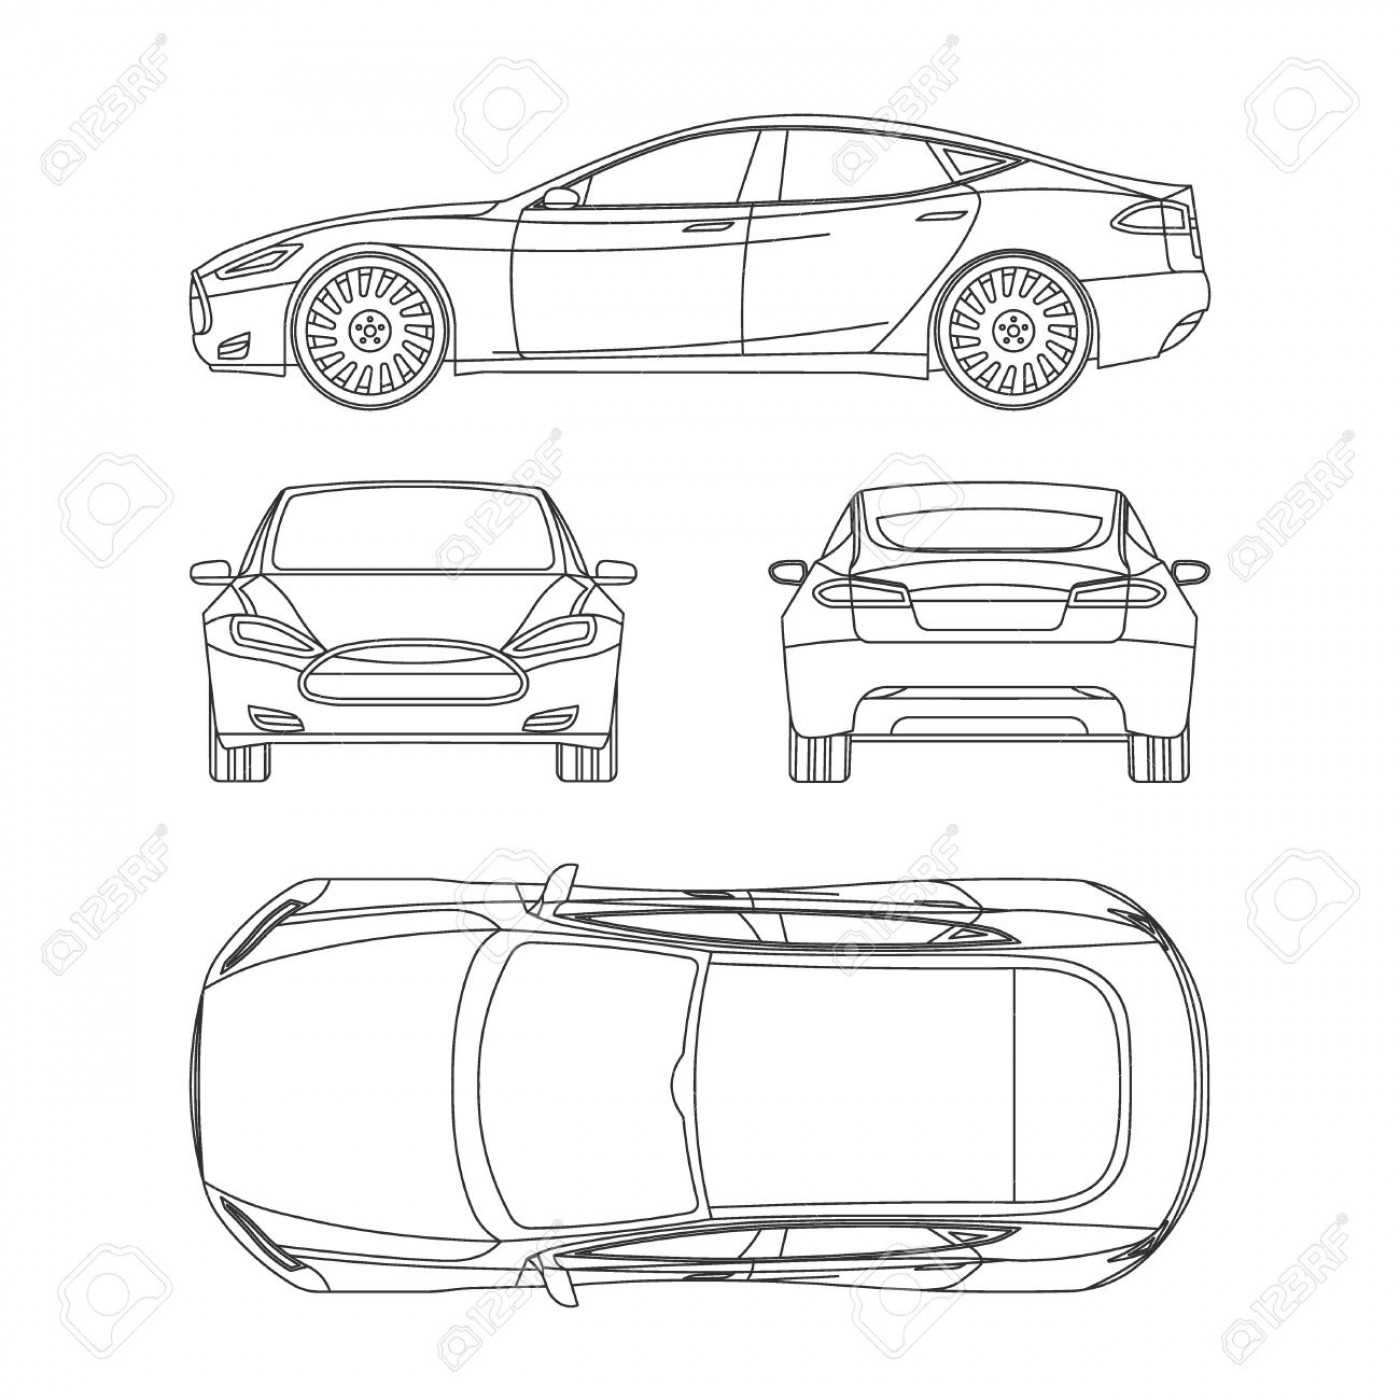 012 Template Ideas Vehicle Condition Report Car Line Draw Intended For Car Damage Report Template